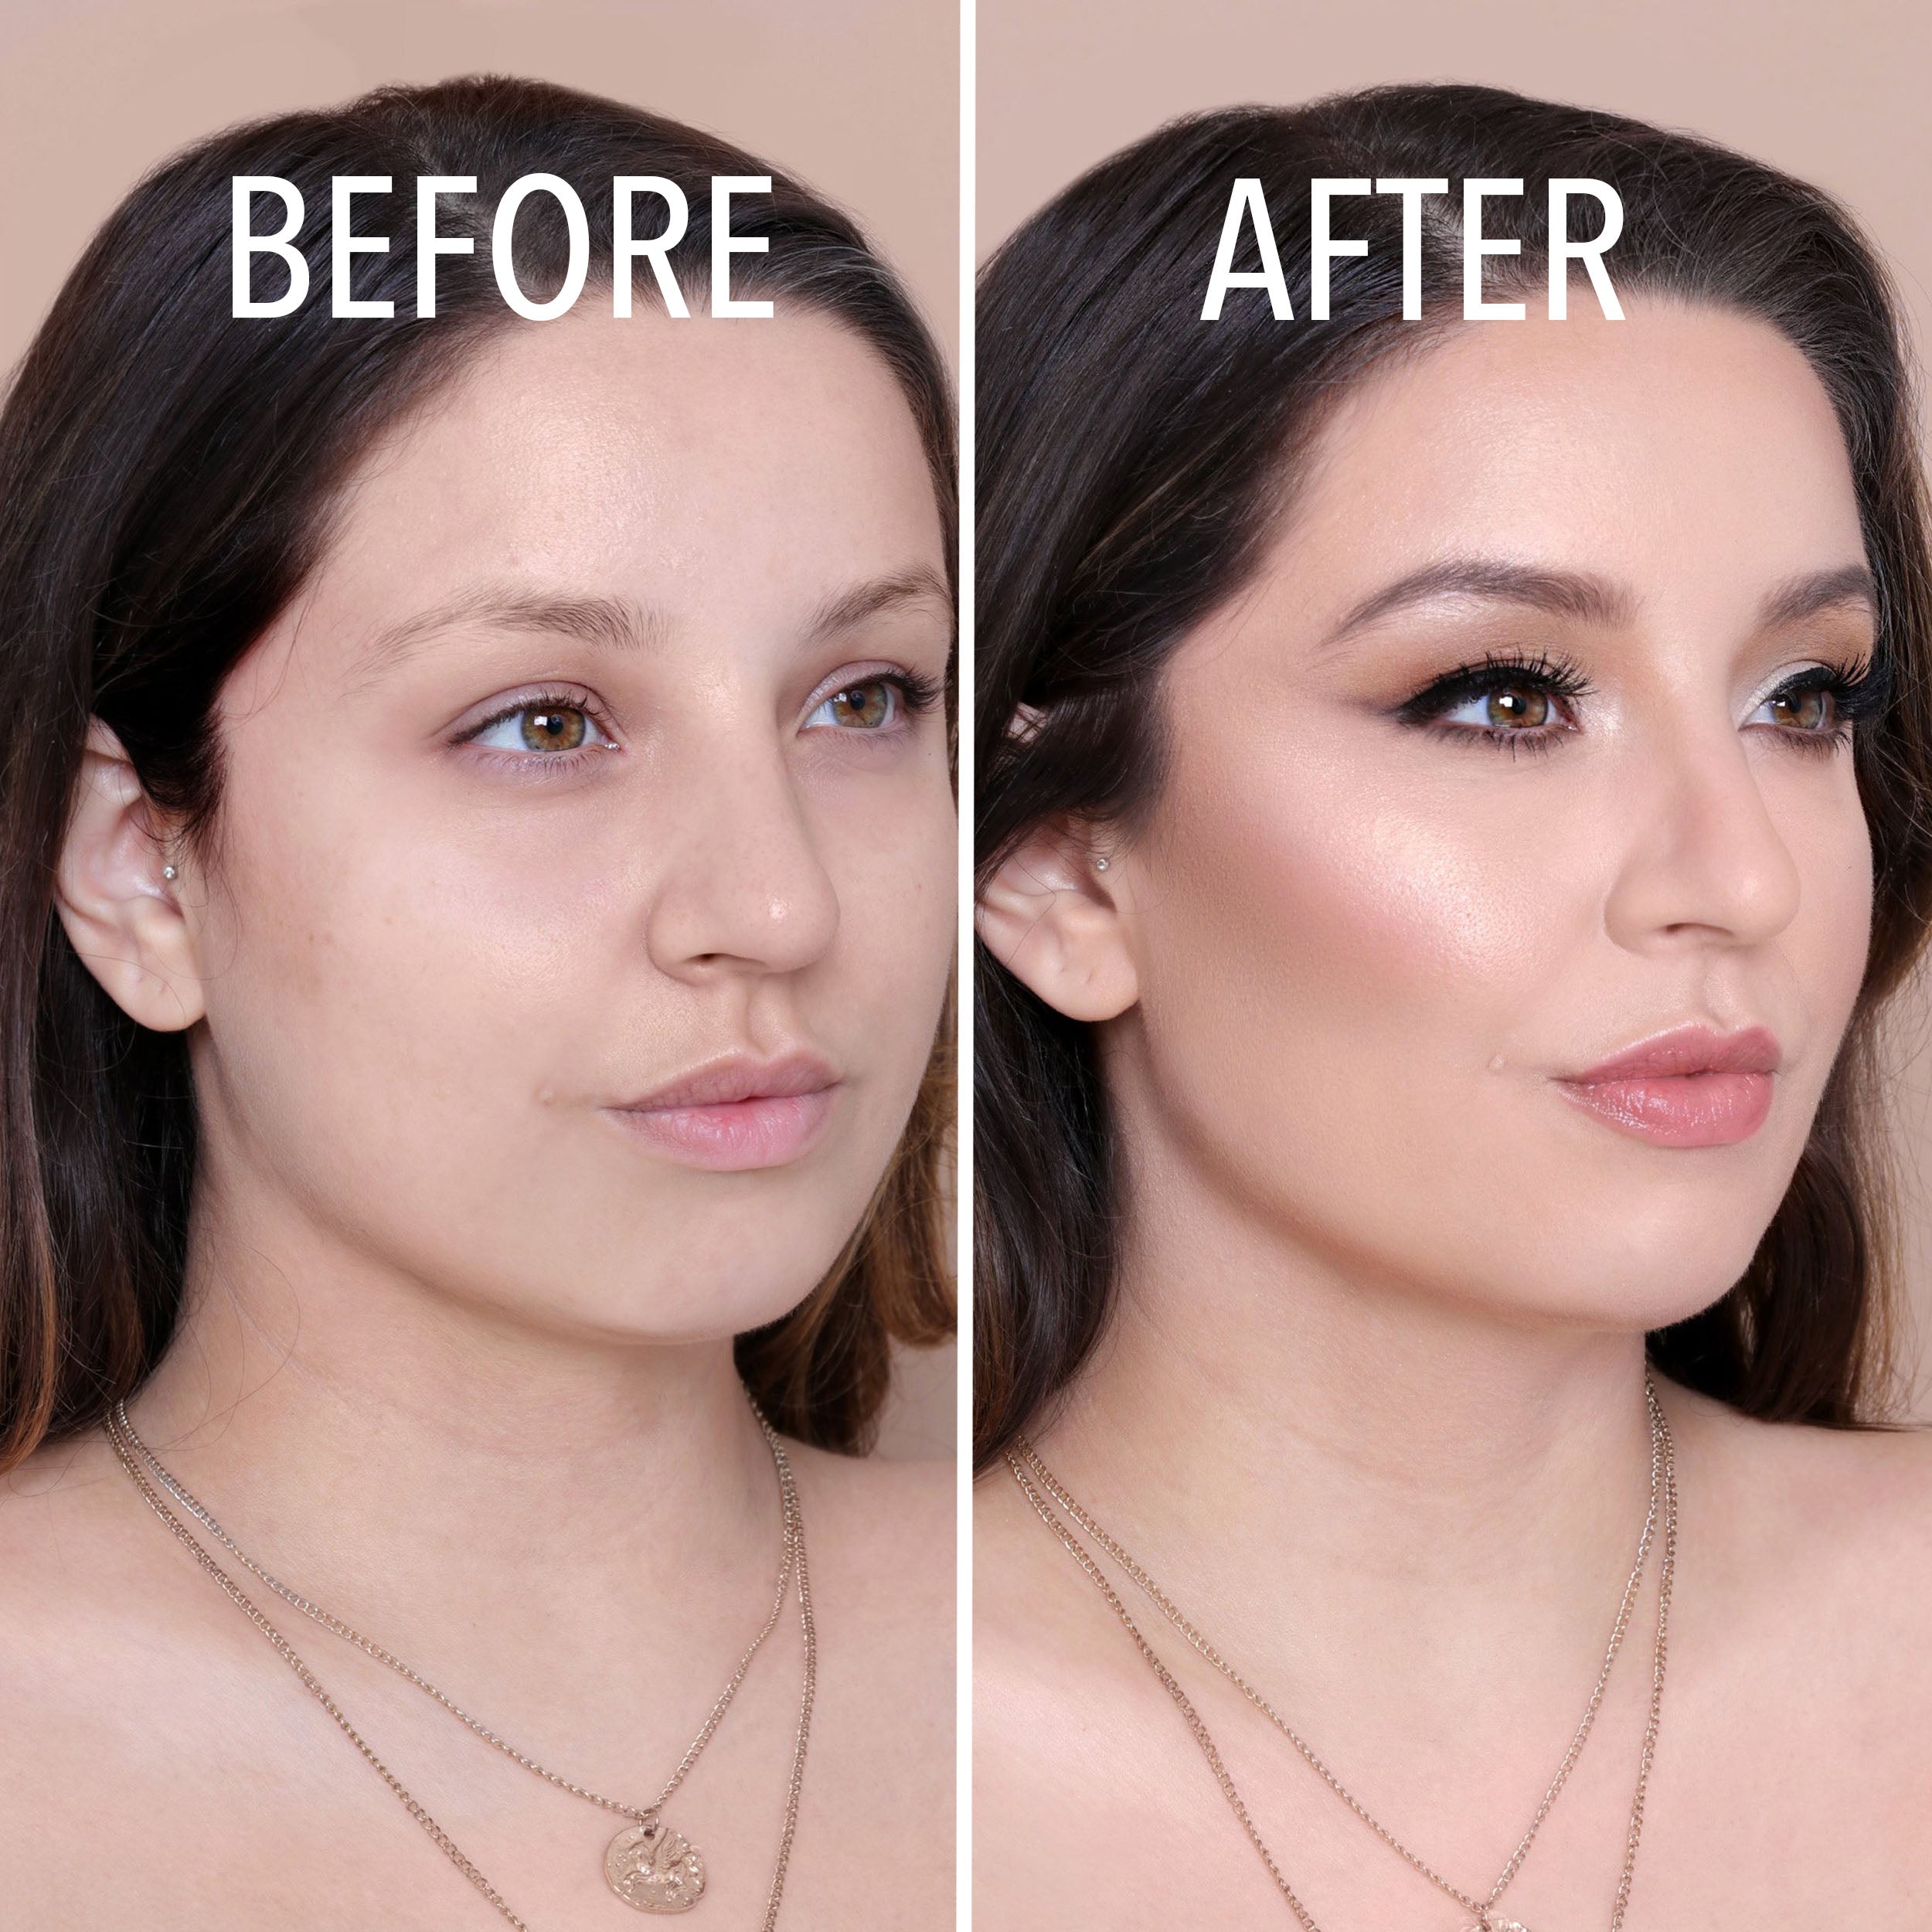 Complete Wear™ Foundation (250, Natural Buff)